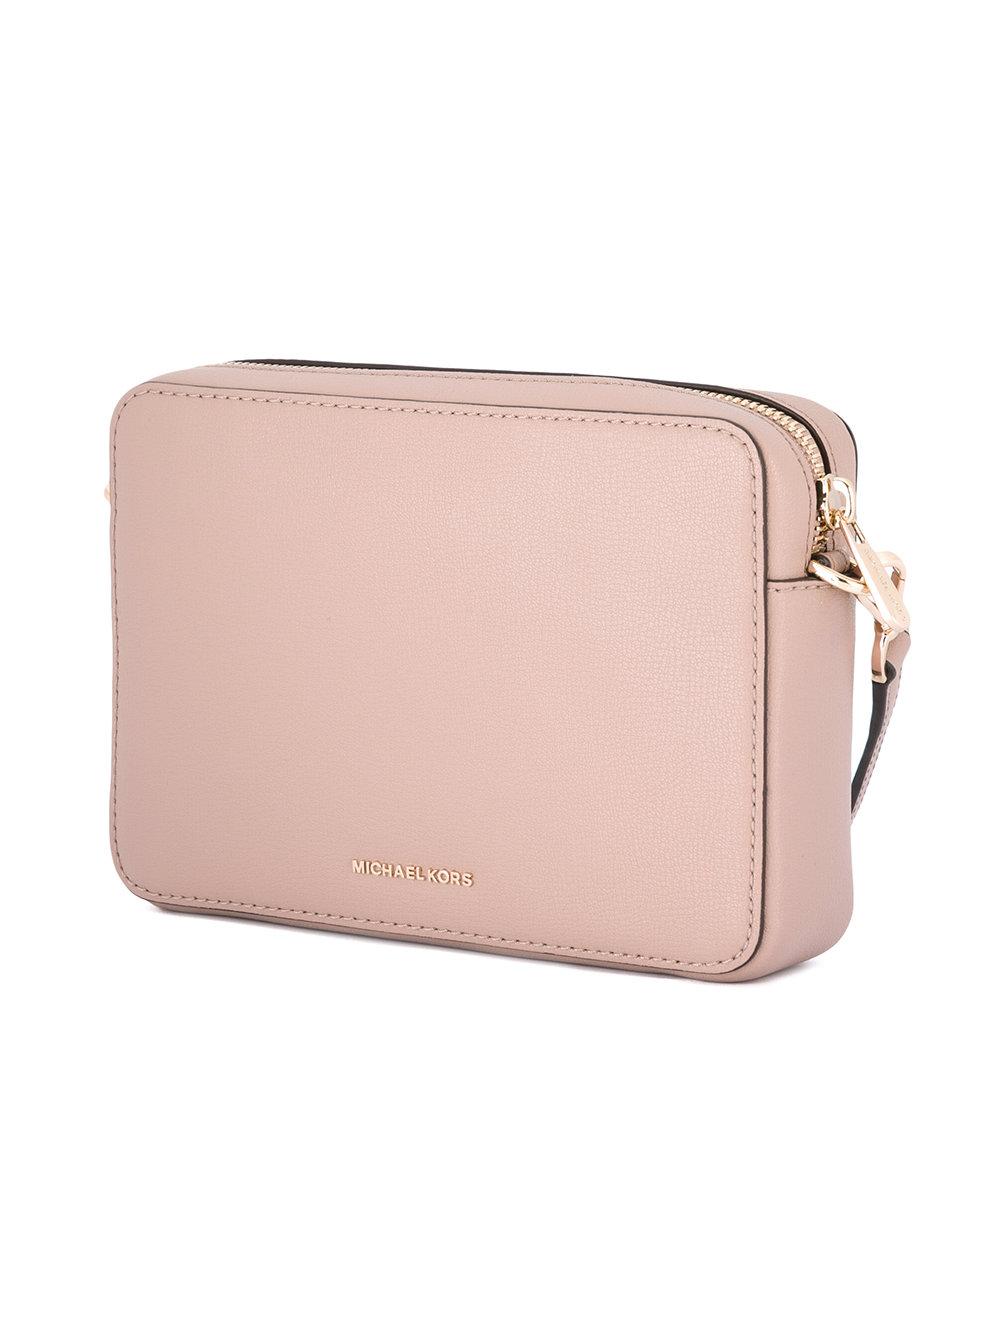 Michael michael kors Scout Studded Crossbody Bag in Pink | Lyst